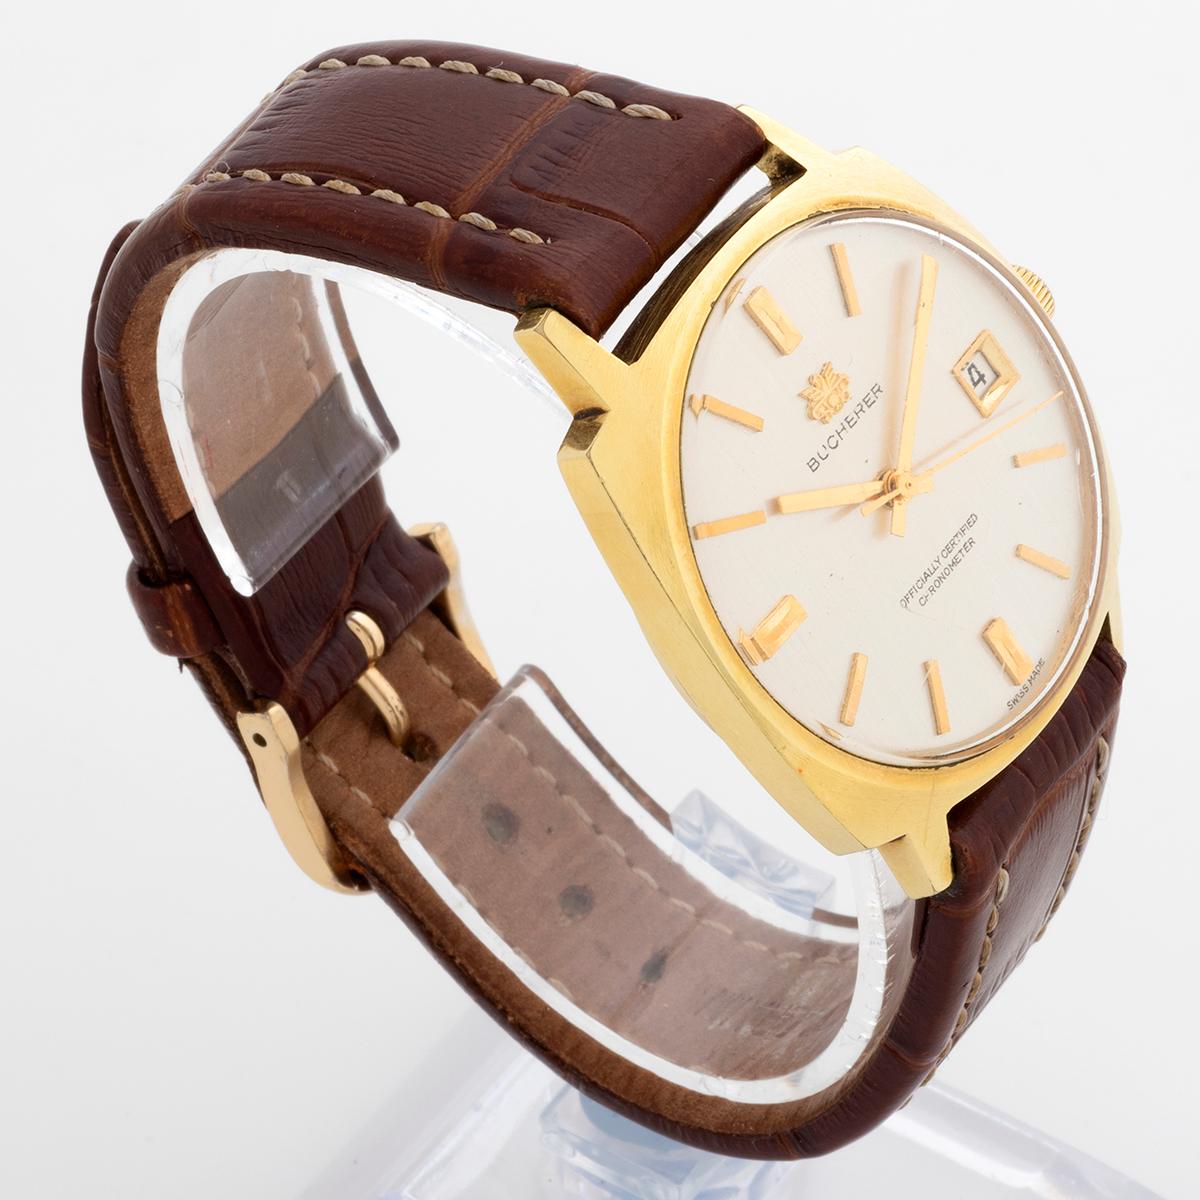 Our vintage Bucherer automatic features a gold capped stainless steel case of 25mm inc crown, 40.5mm lug to lug, screw down case back, plexiglas and dial with applied Bucherer logo, and Officially certified chronometer. A replacement leather strap